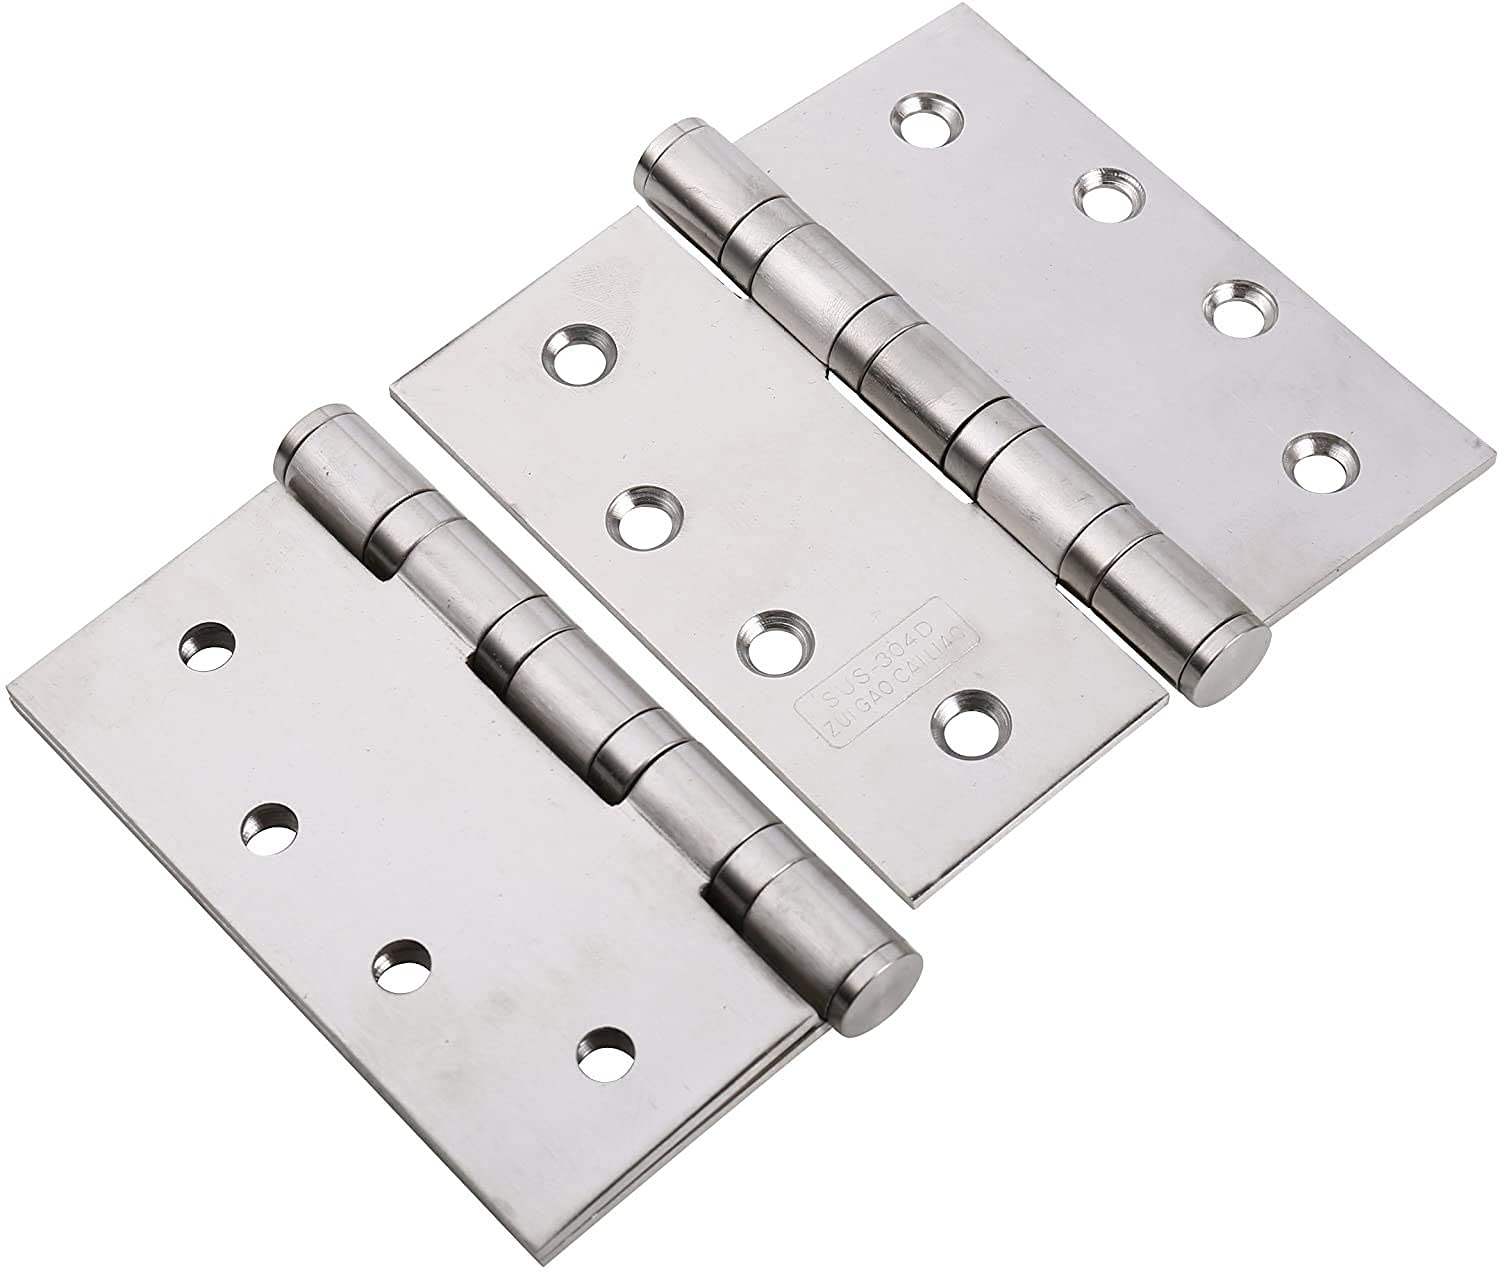 Stainless Steel Door Hinges 4x4" with Soft Close Ball Bearing By UHPPOTE (2pcs)